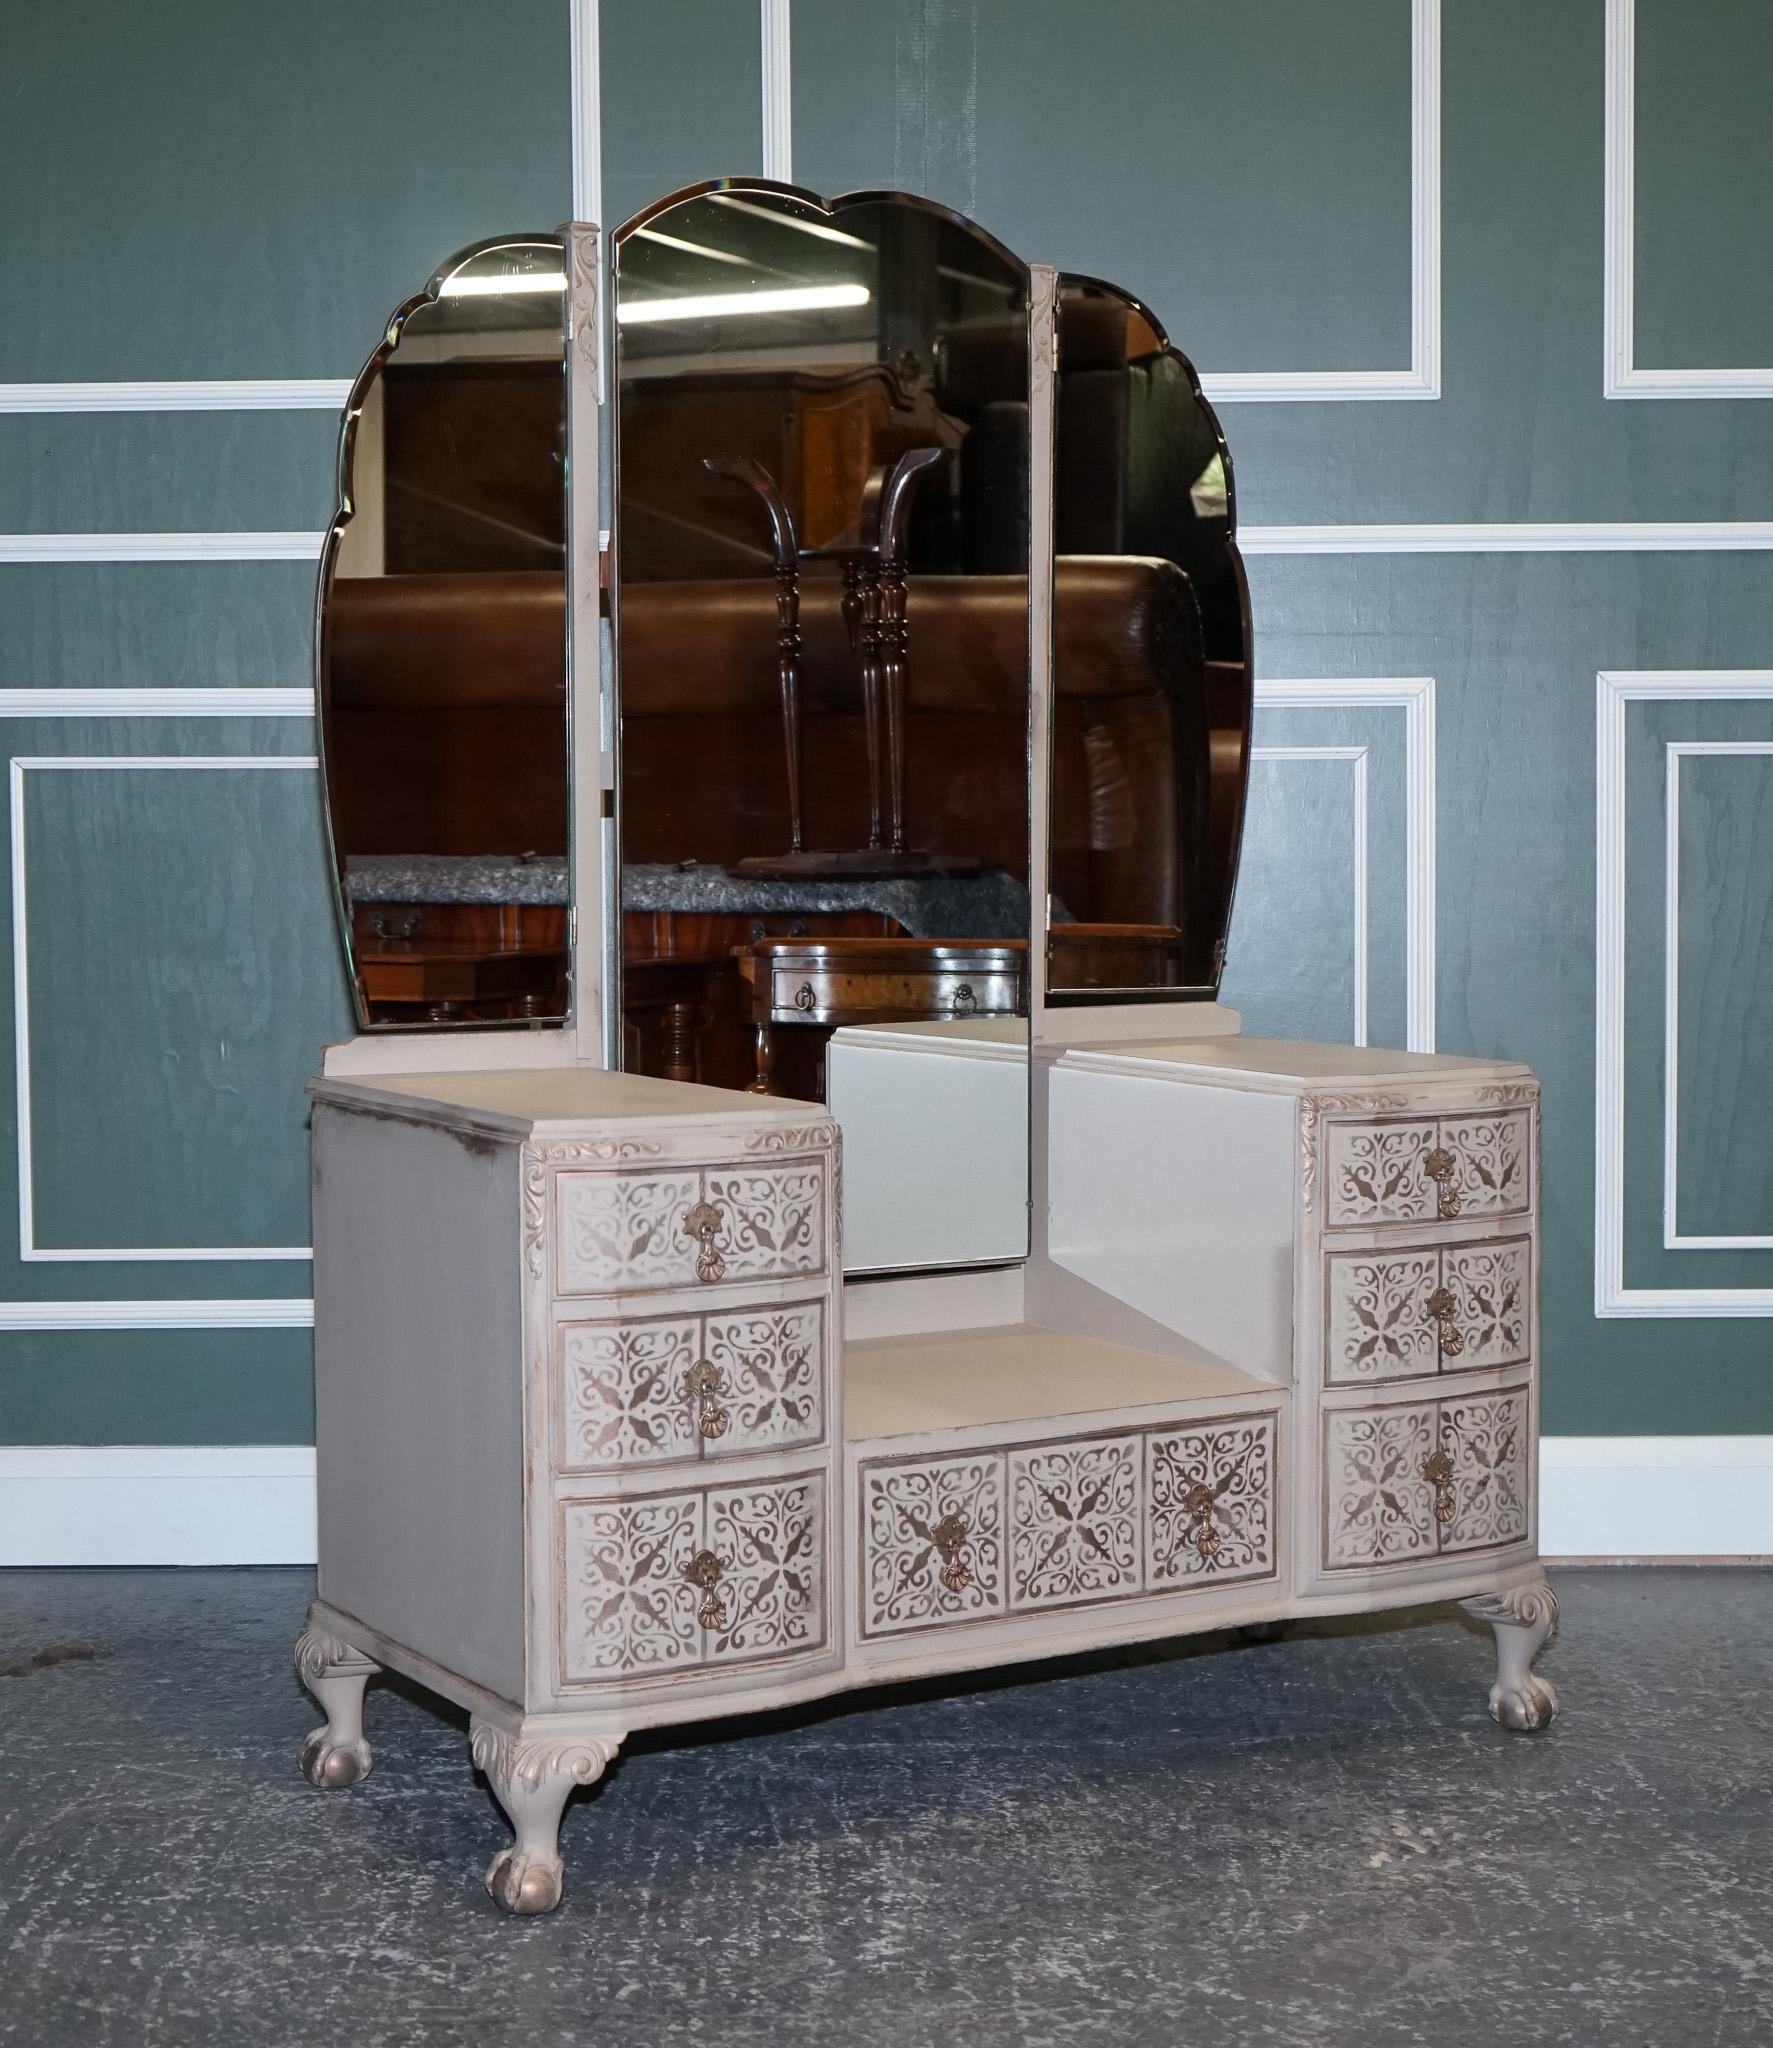 We are delighted to offer for sale this Waring & Gillow 1932 Antiqued Hand Painted Dressing Table.

An antiqued hand-painted dressing table with designs on the drawers is a stunning piece of furniture that is sure to elevate any bedroom. 

This